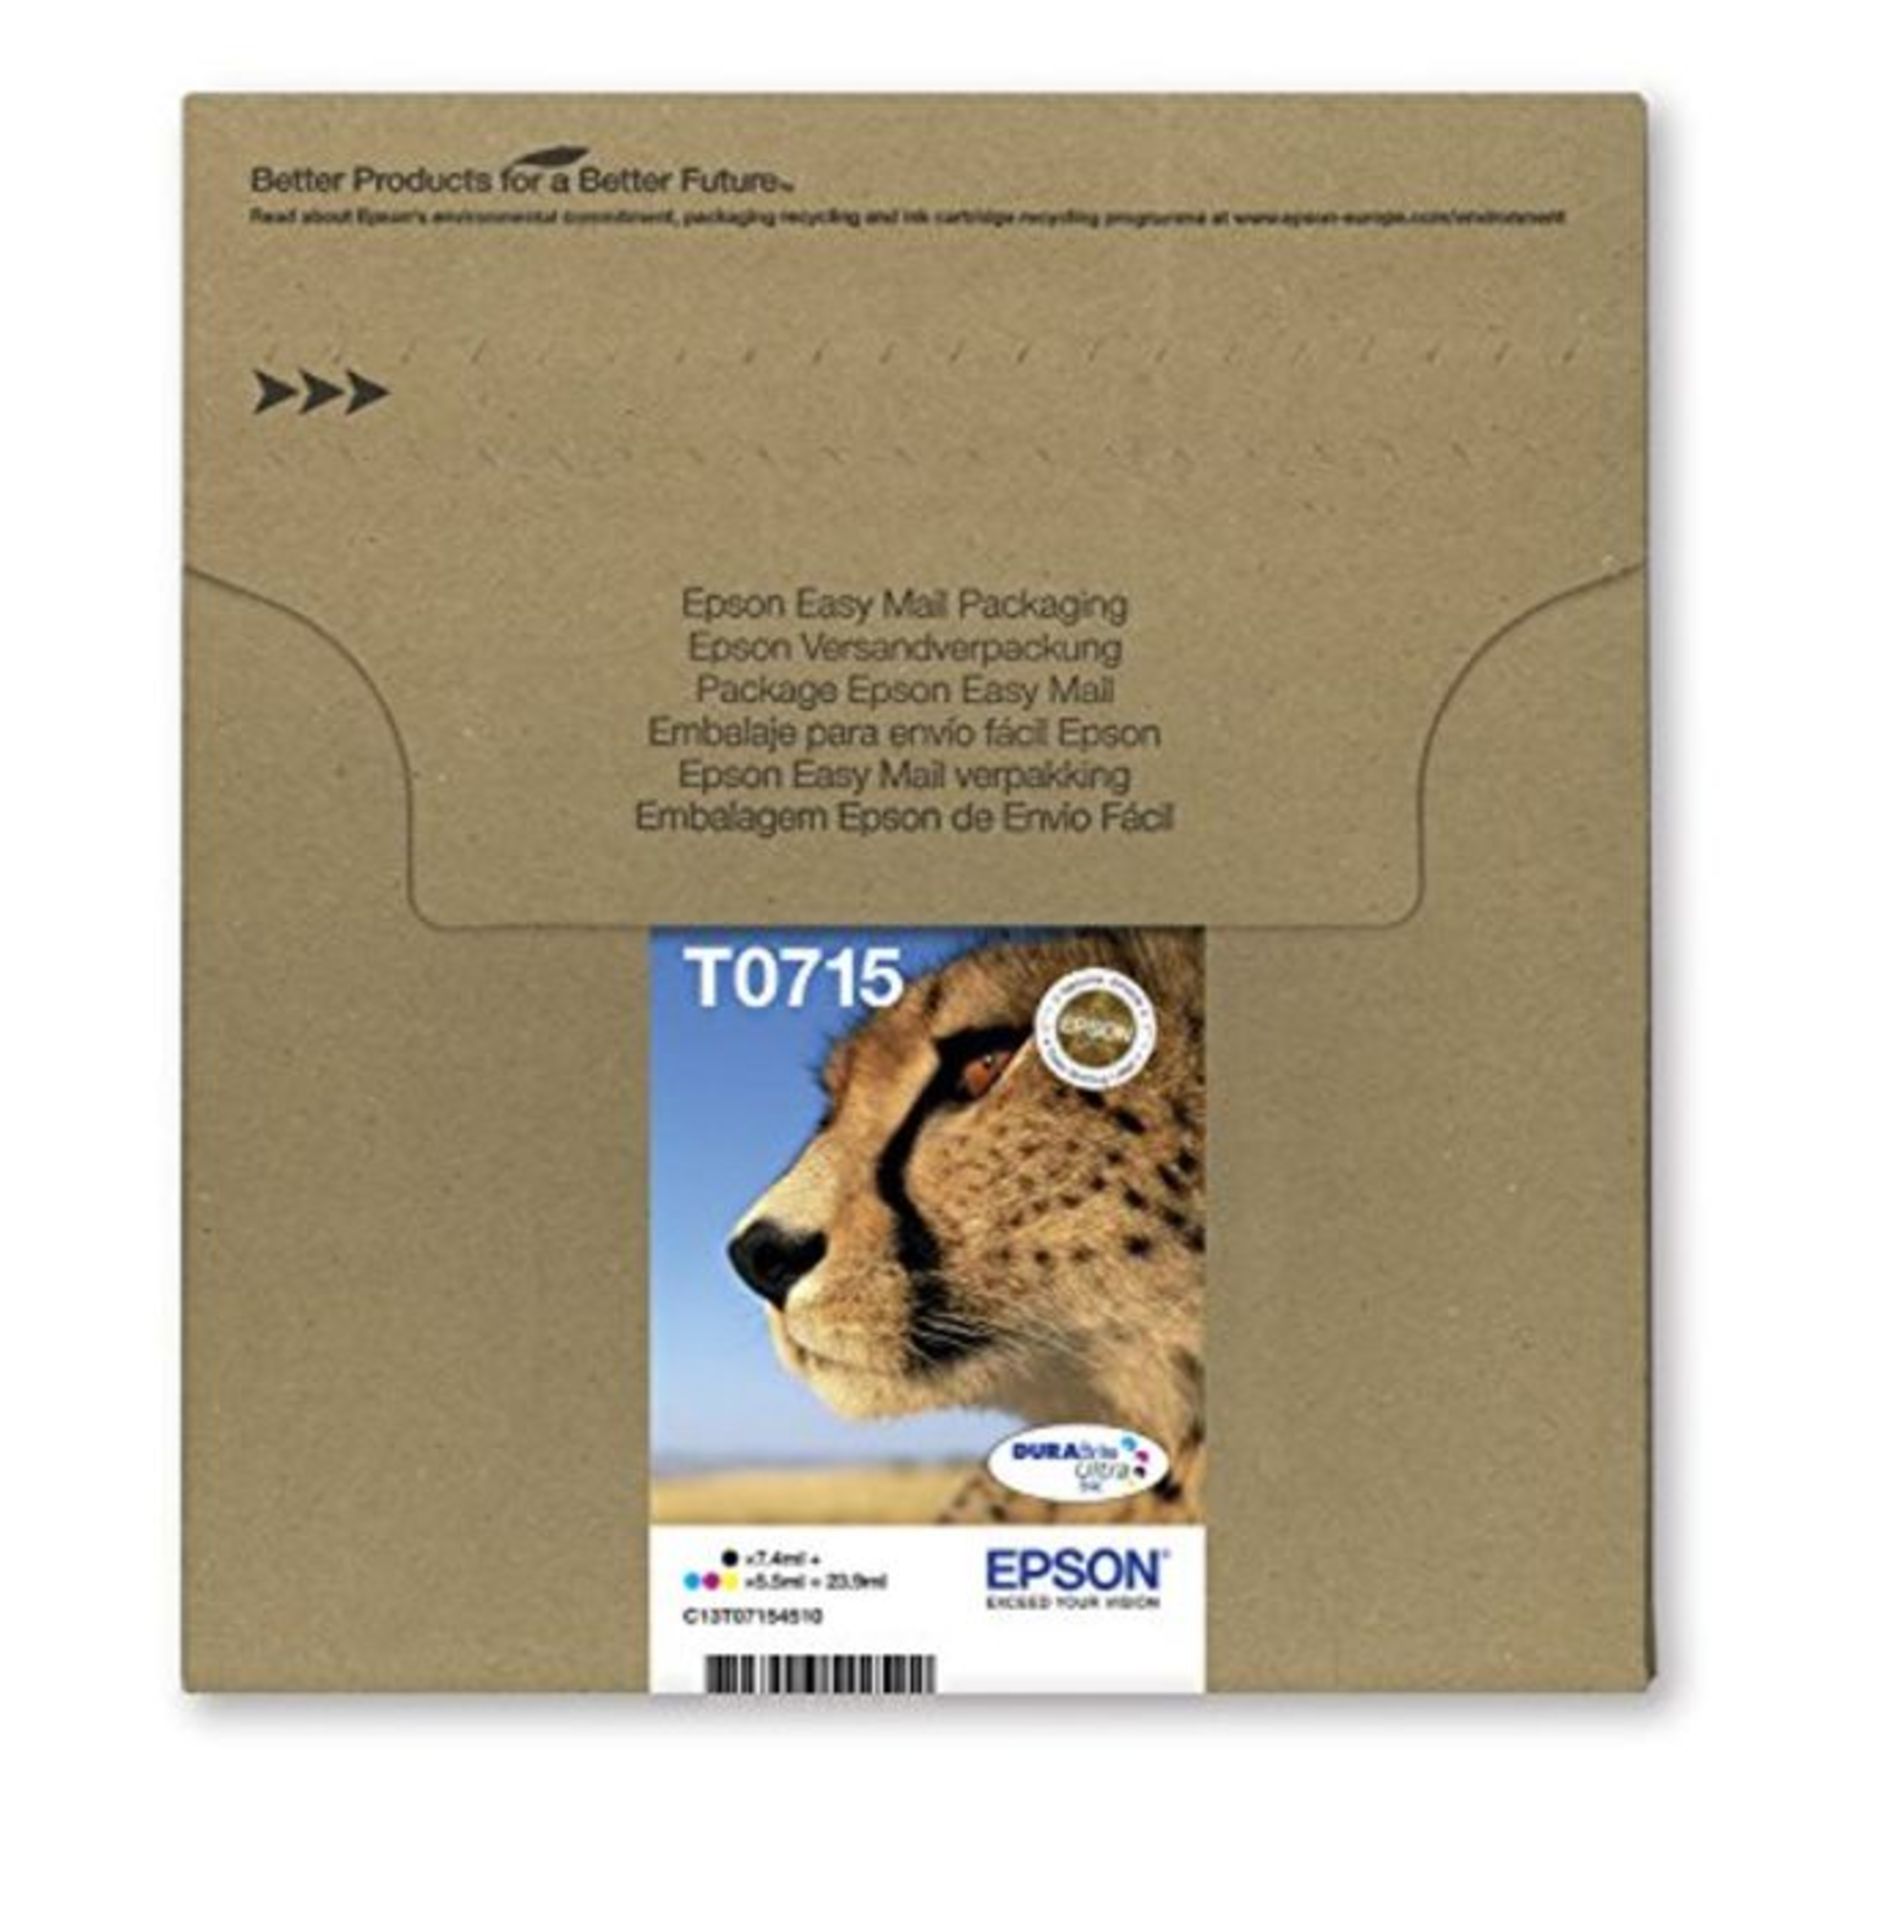 Epson T0715 Cheetah Genuine Multipack, Eco-Friendly Packaging, 4-colours Ink Cartridge - Image 3 of 4